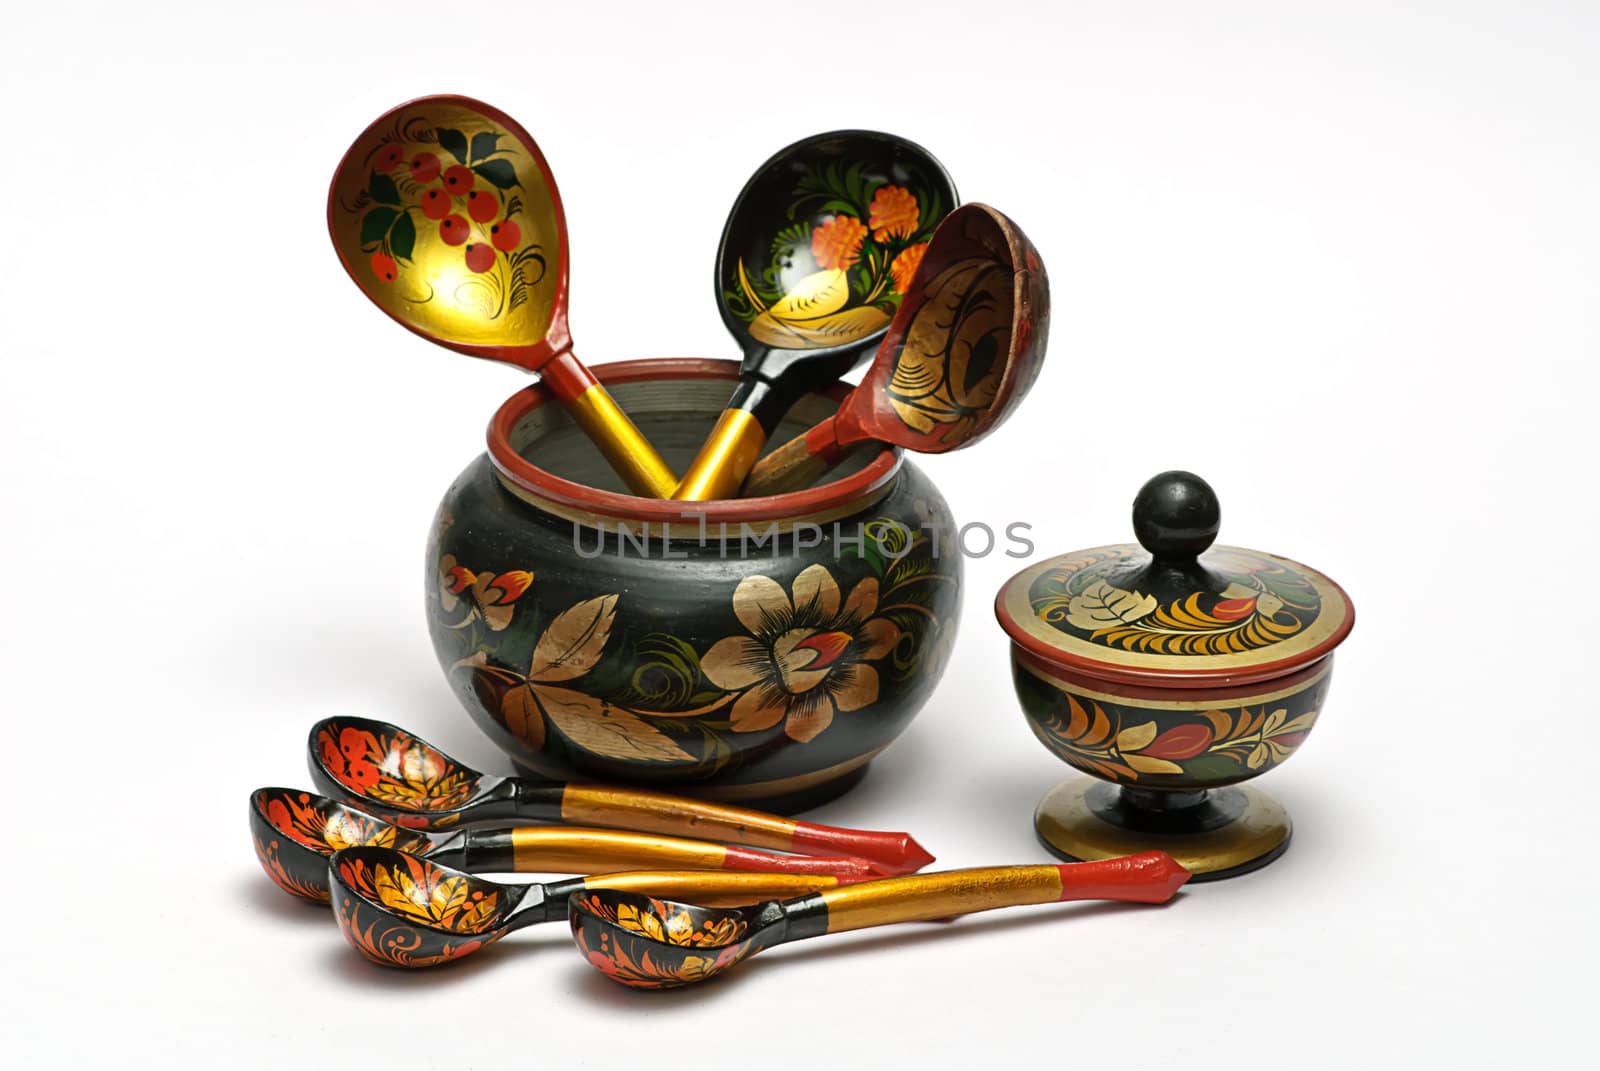  decorated wooden hand made tableware,